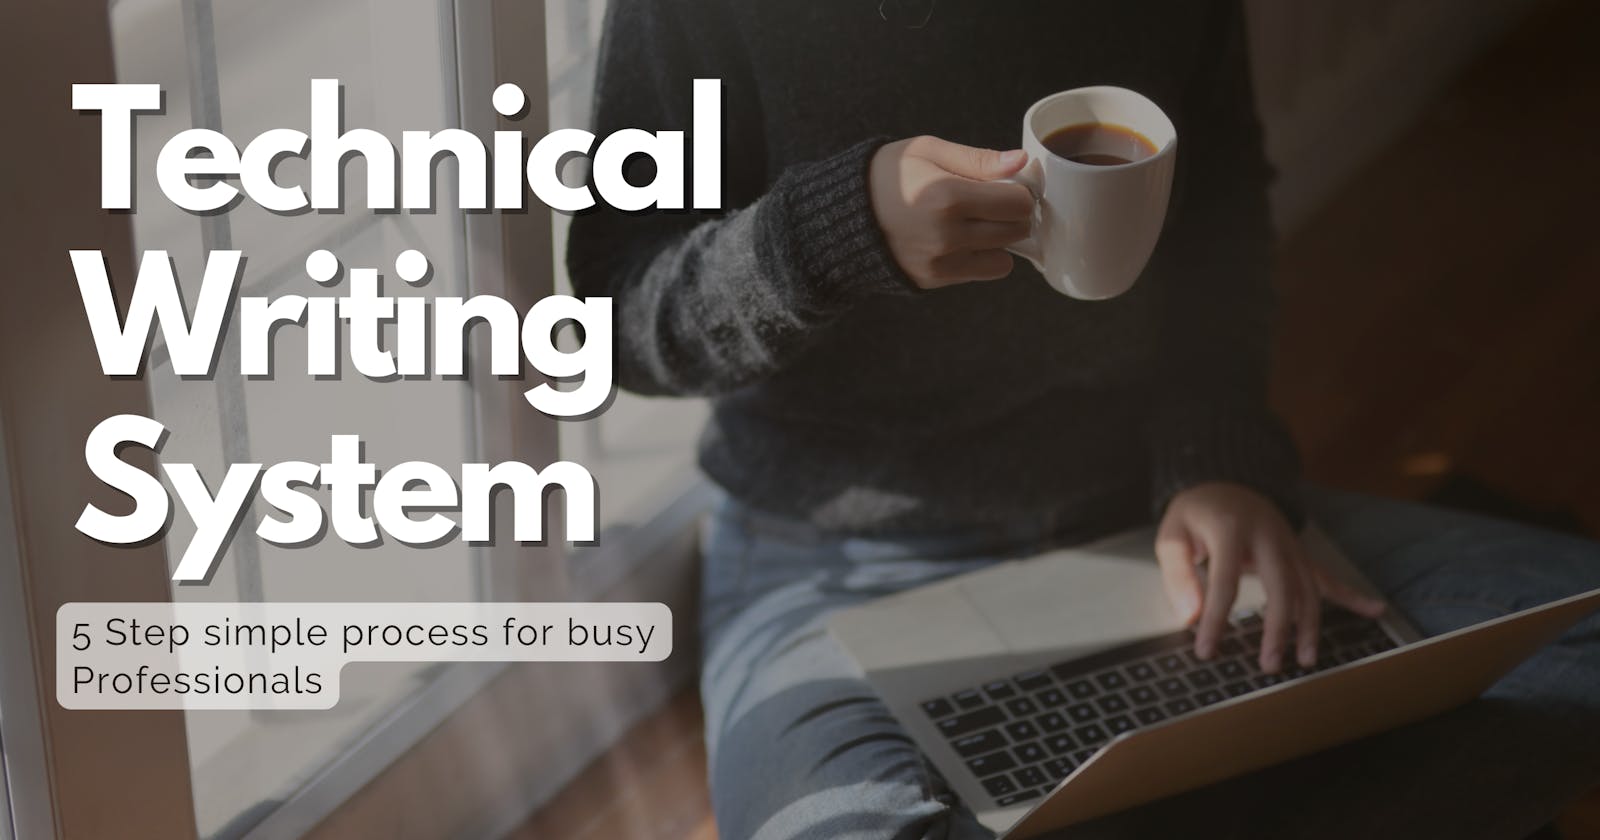 My 5 Step Technical Writing System for Busy Working Professionals